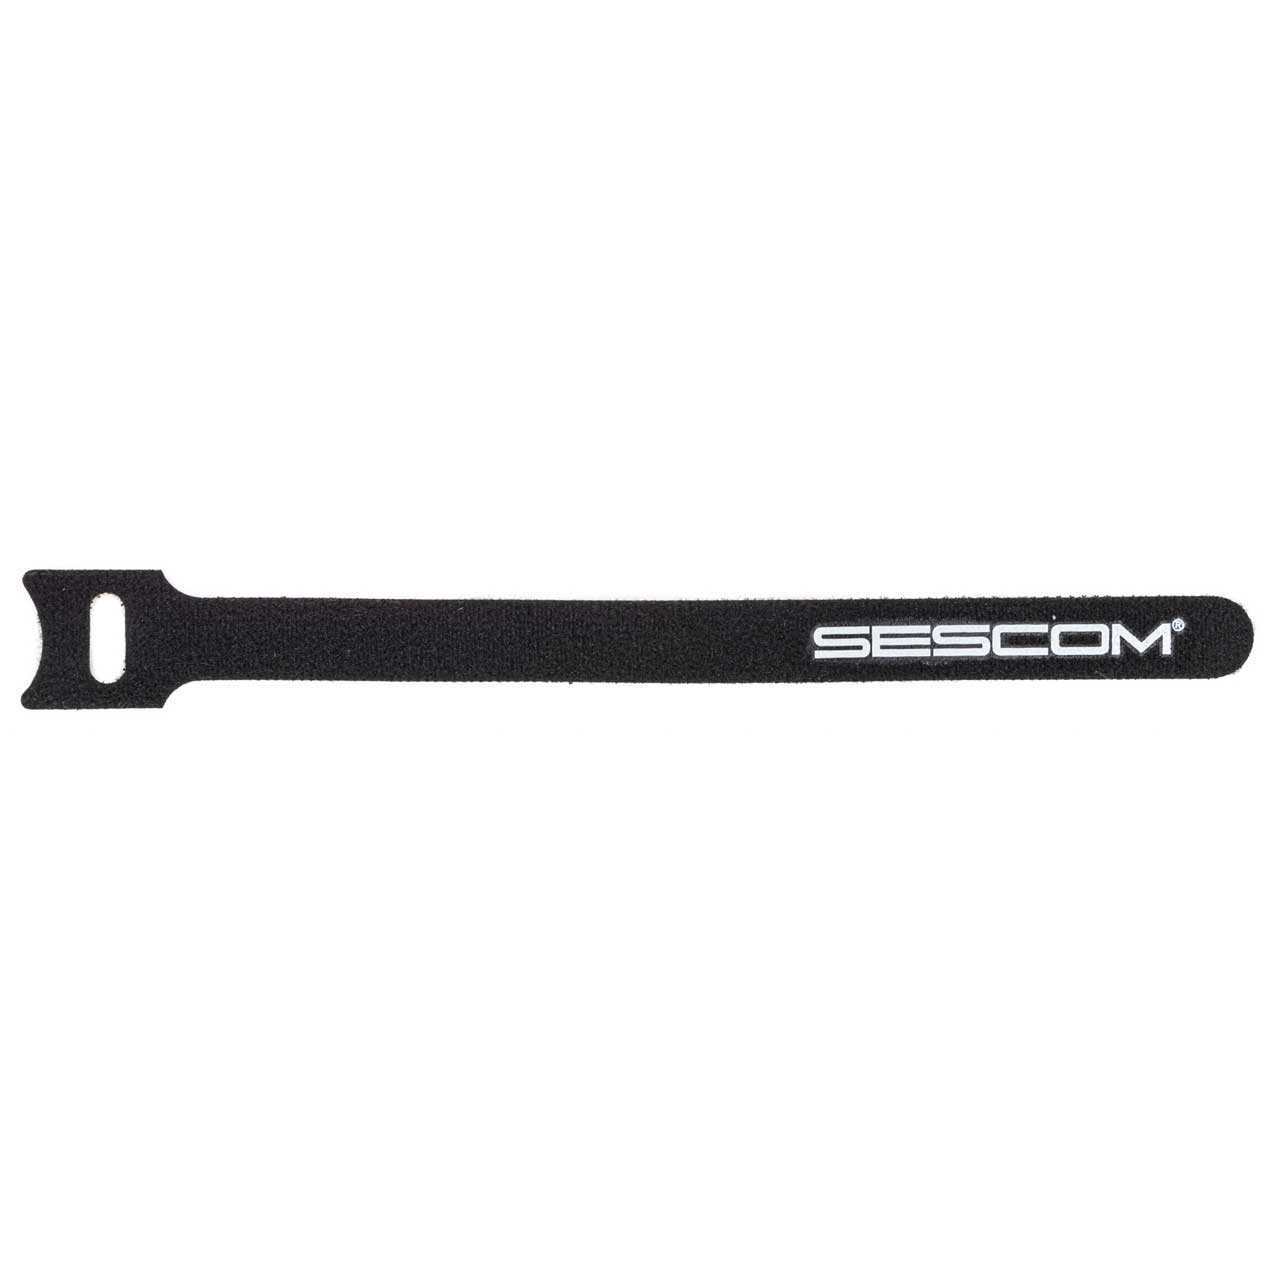 Sescom Hook and Loop Cable Wrap 12mm x 180mm Black with White Logo - 50 Pack SES-HKNLP-50PK